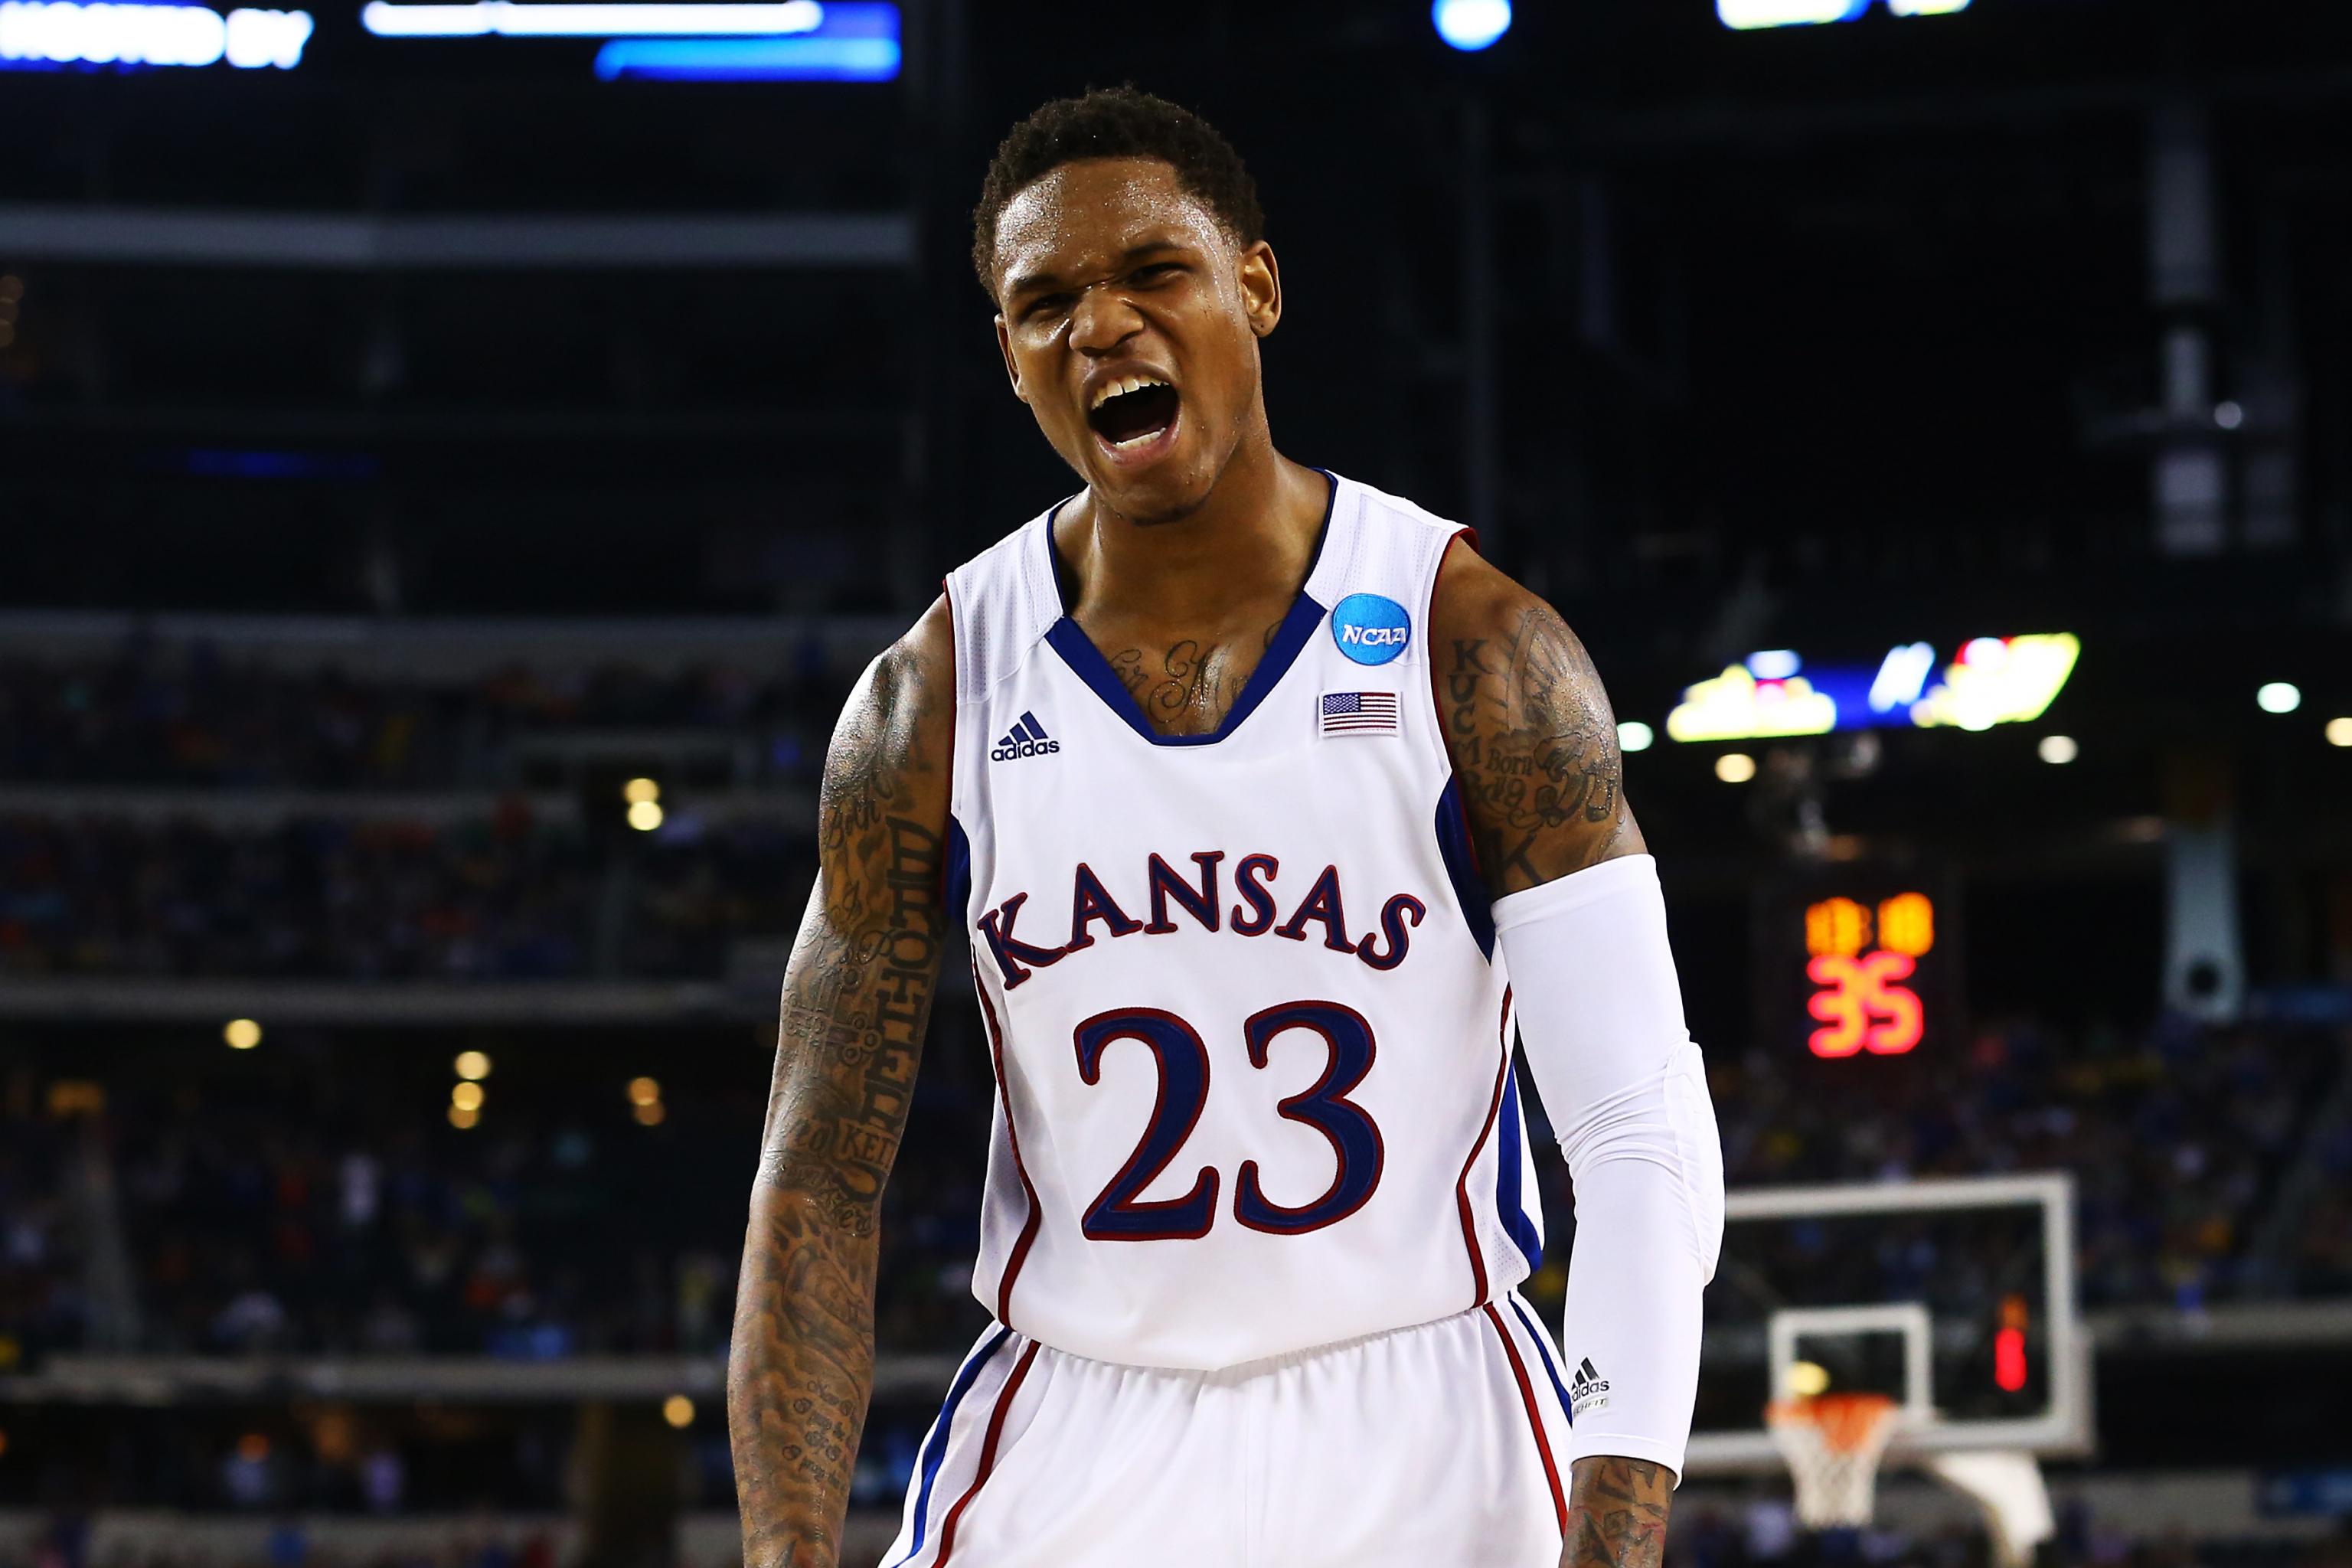 Ben Mclemore Nba Combine 2013 Measurements Analysis And Draft Projection Bleacher Report Latest News Videos And Highlights